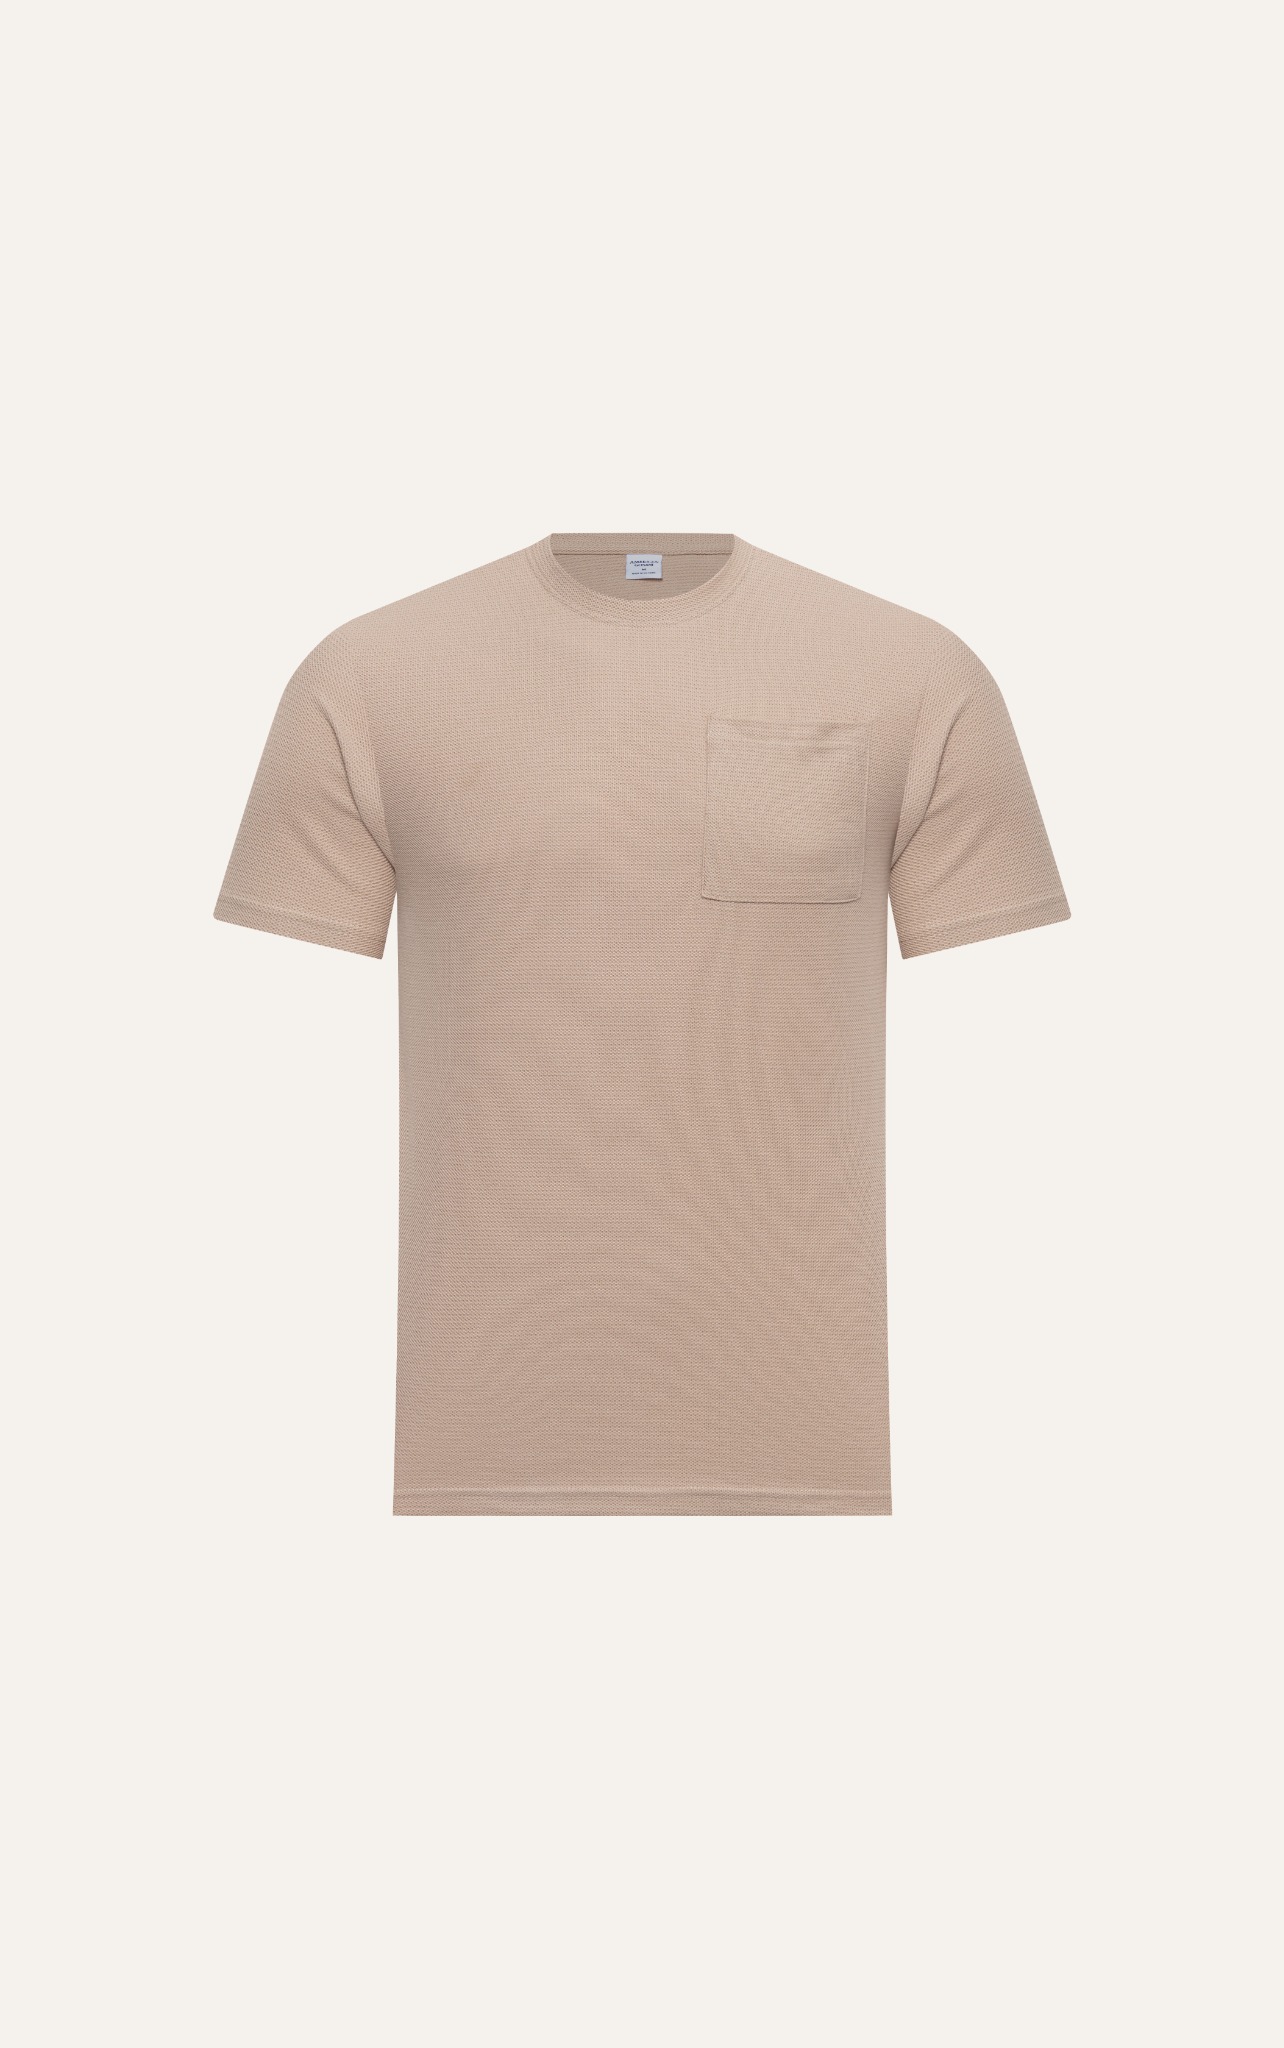 AG63 FACTORY REGULAR FIT BASIC T-SHIRT WITH POCKET - BROWN